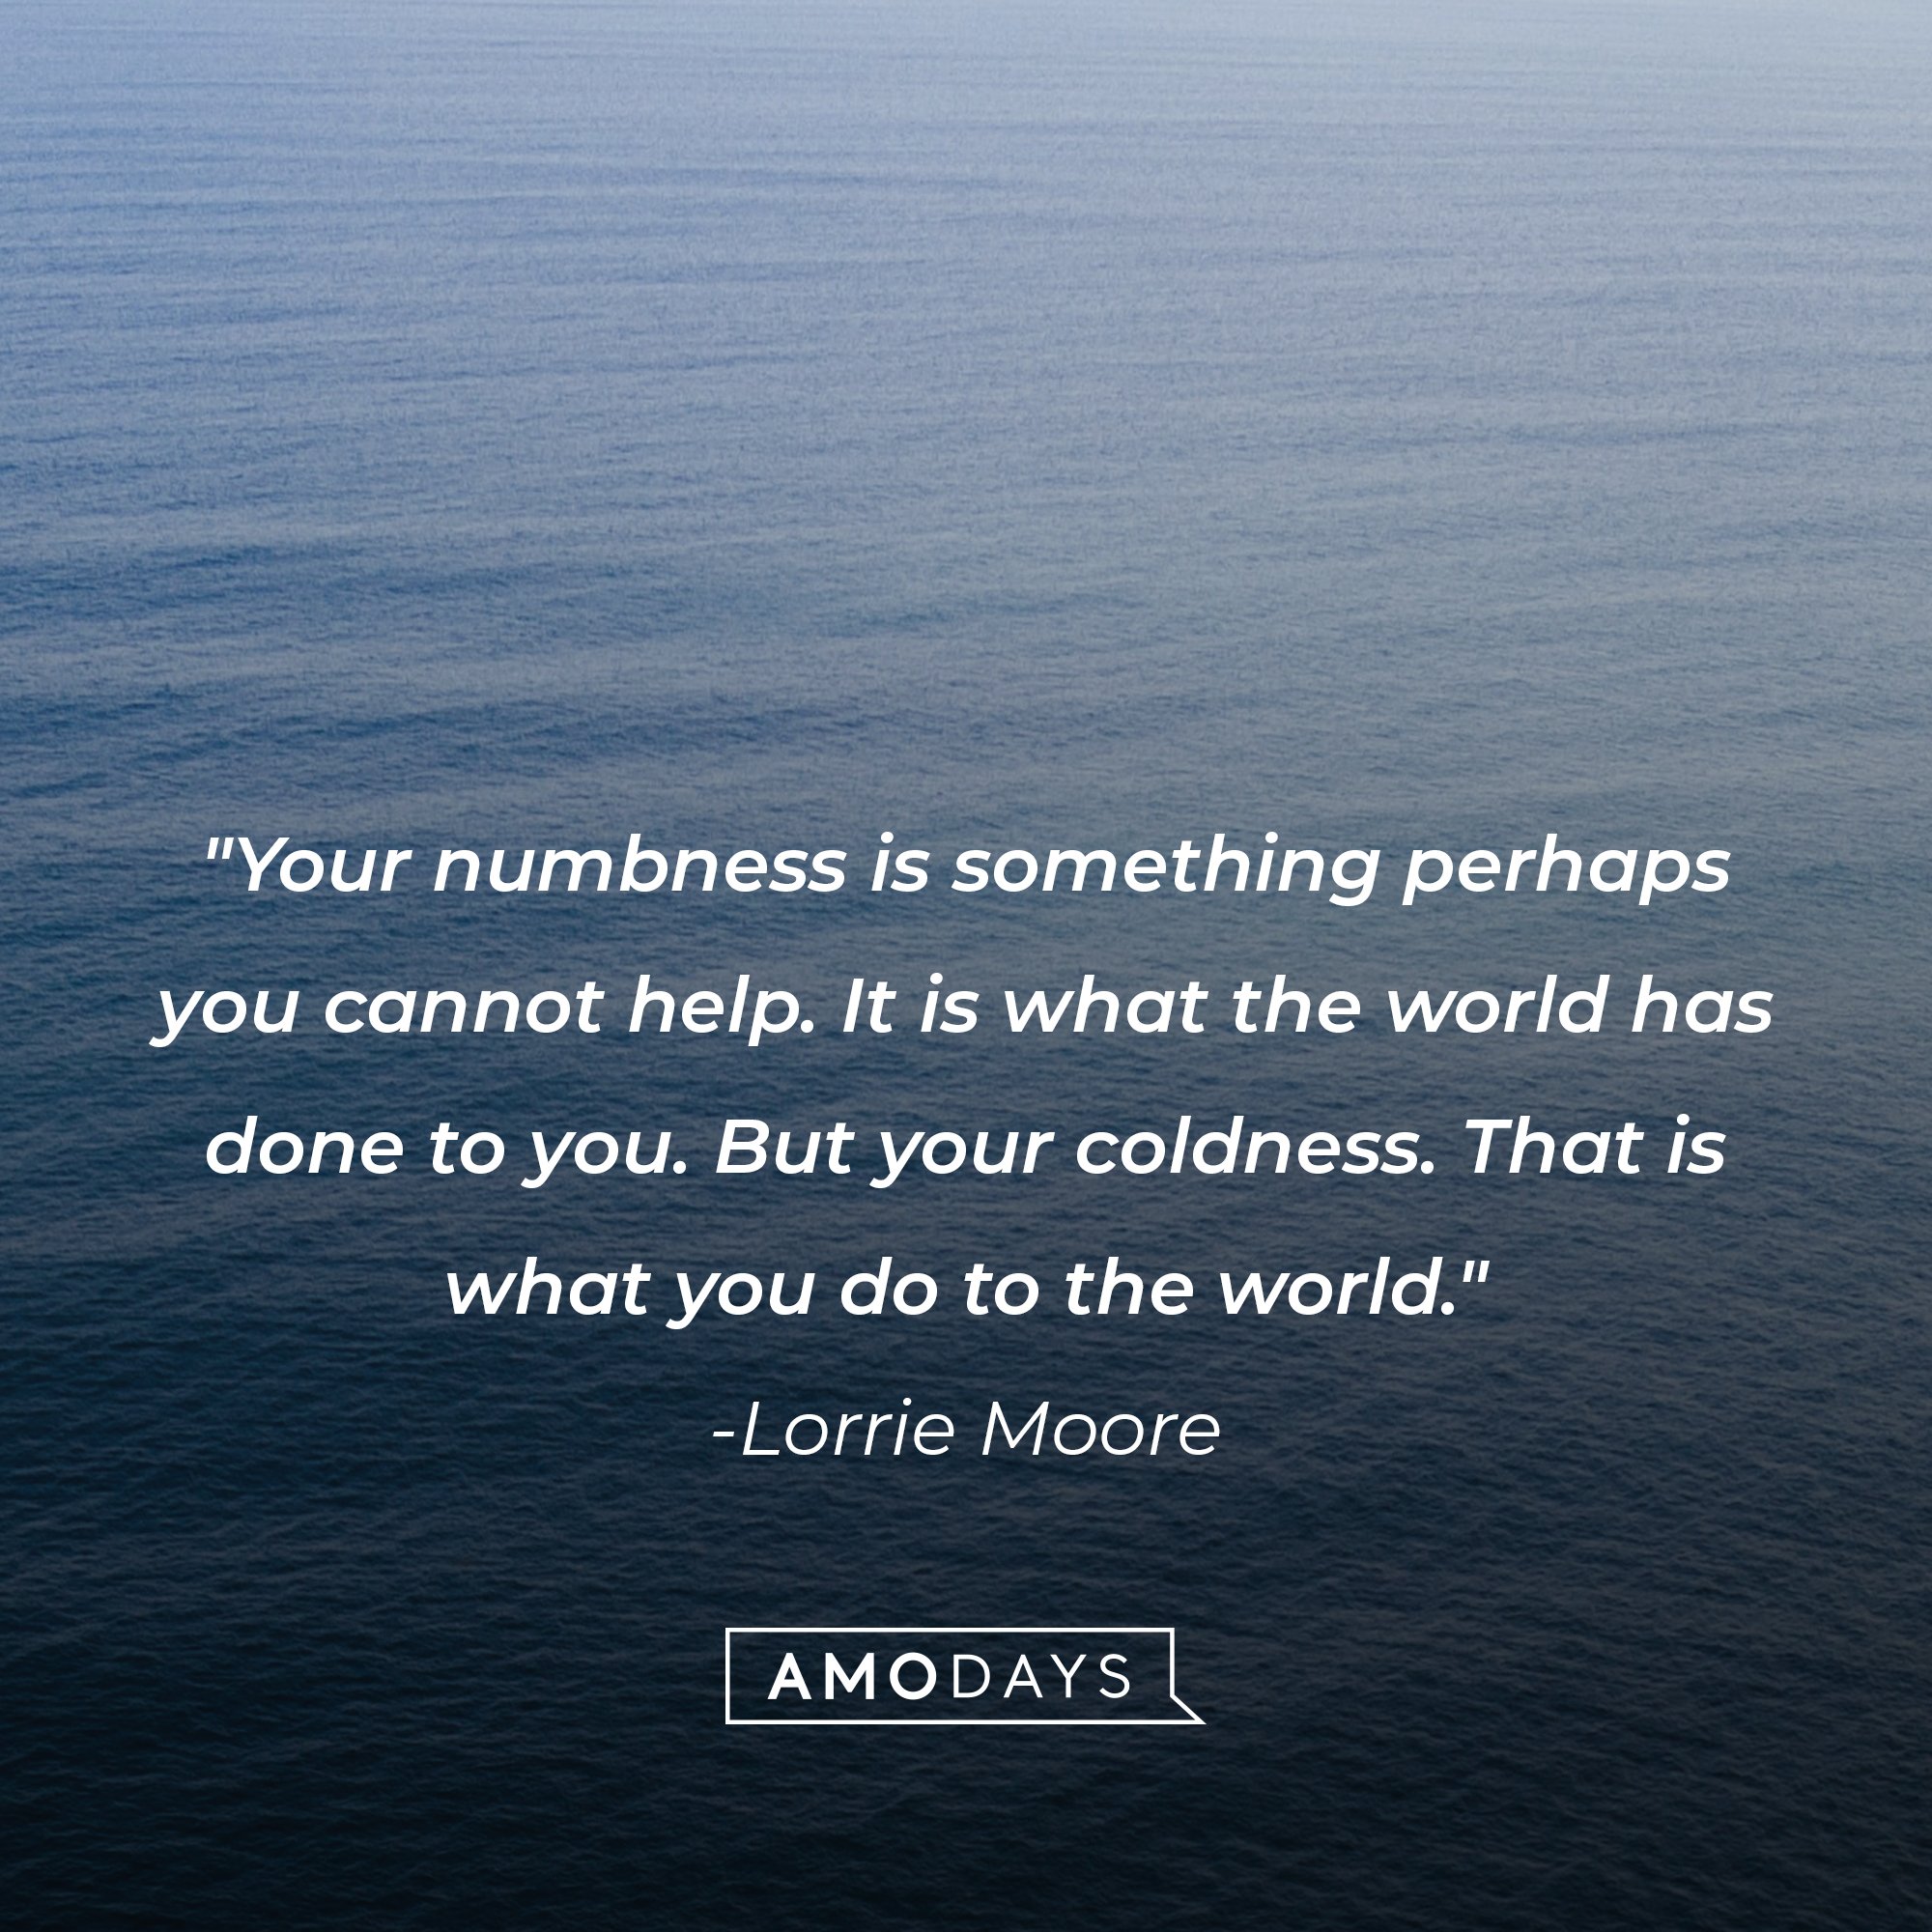   Lorrie Moore’s quote: "Your numbness is something perhaps you cannot help. It is what the world has done to you. But your coldness. That is what you do to the world." | Image: AmoDays 